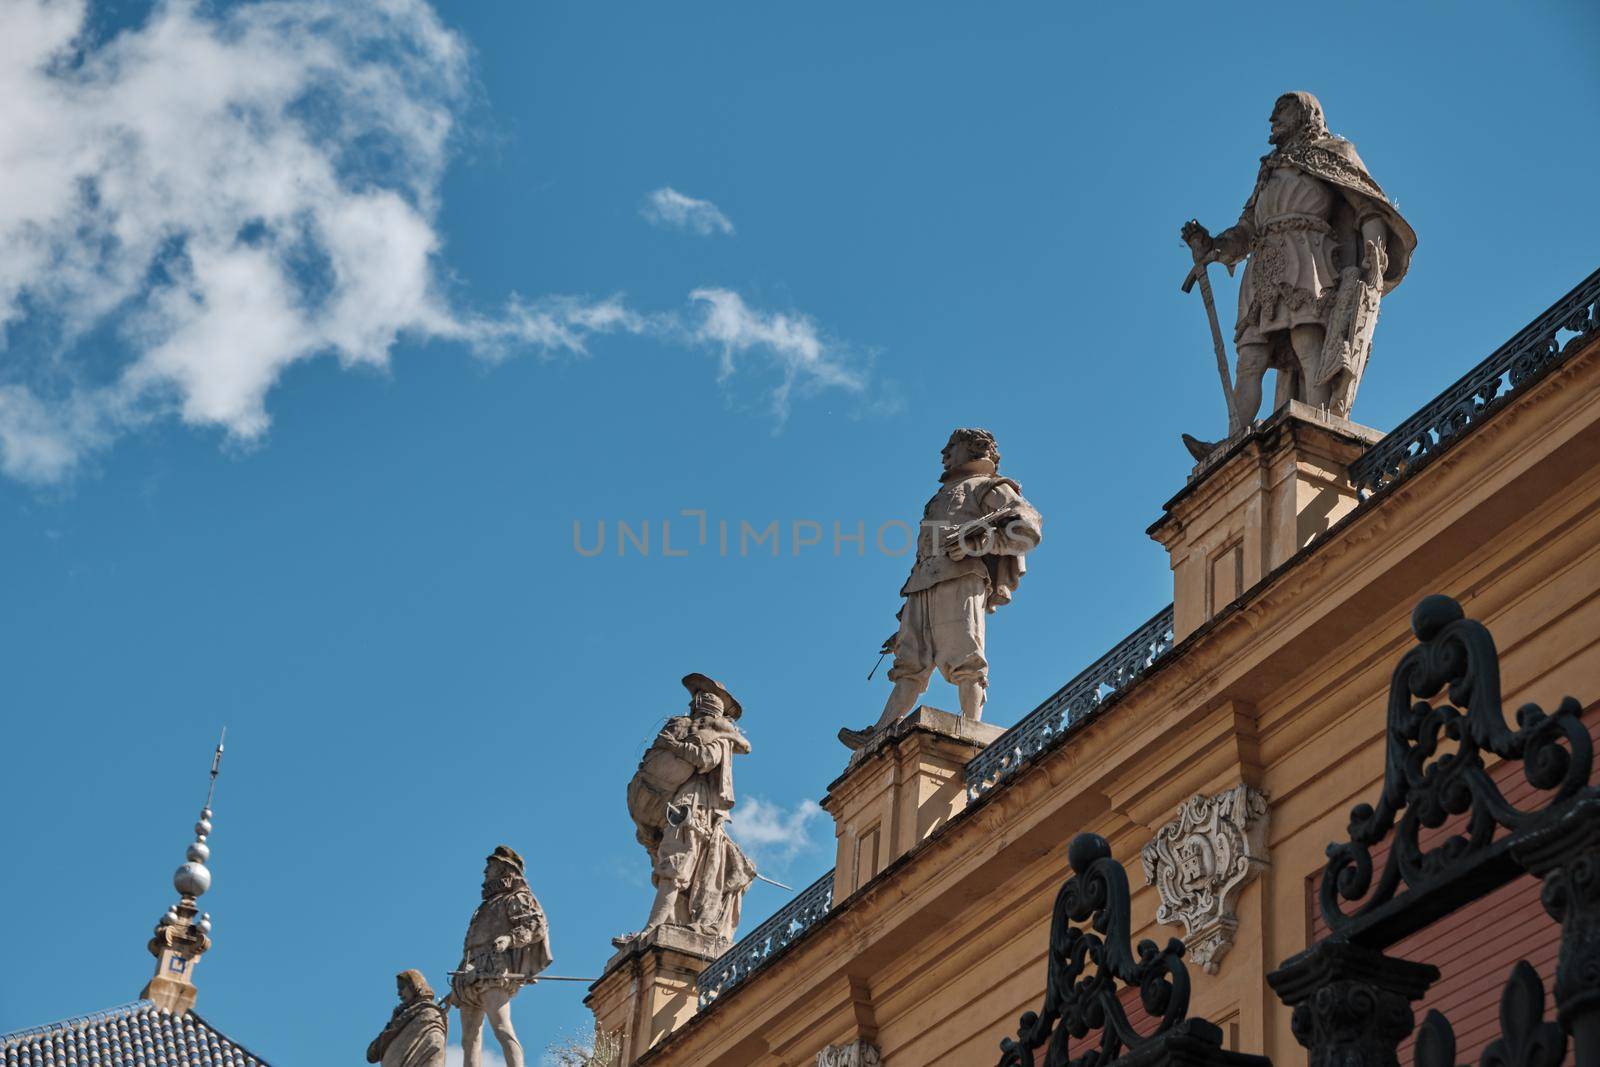 statue on old building in seville in a sunny day - spain - body copy - negative space - blue sky. by Sandronize